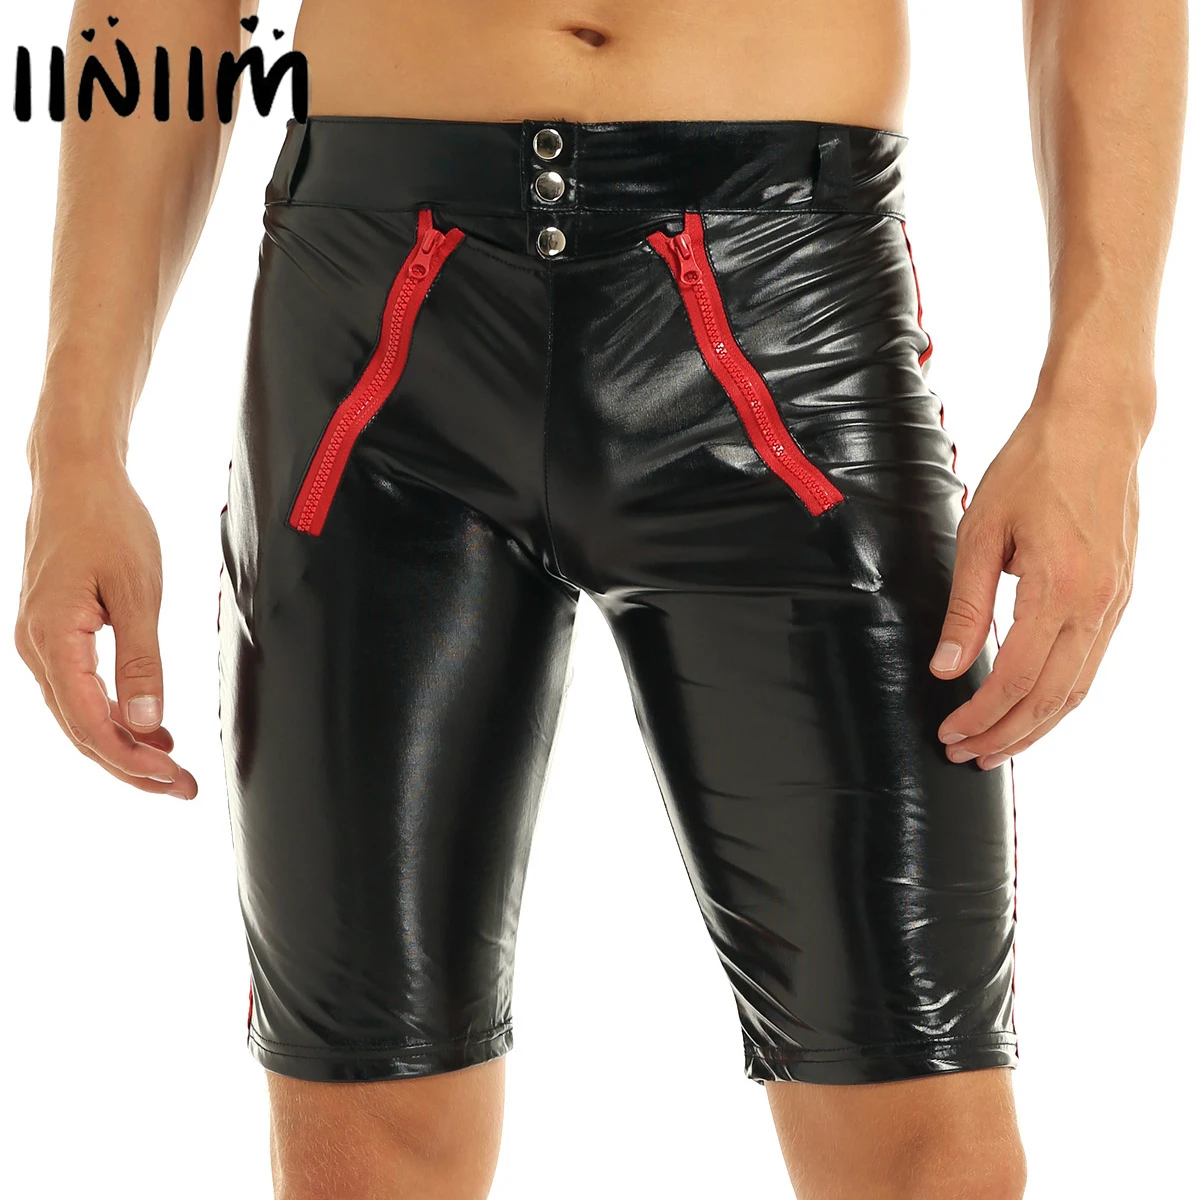 best casual shorts for men iiniim Sexy Men Patent Leather Wetlook Moto Sexy Boxer Shorts Lingerie Opened with Zipper Night Parties Clubwear Shorts smart casual shorts mens